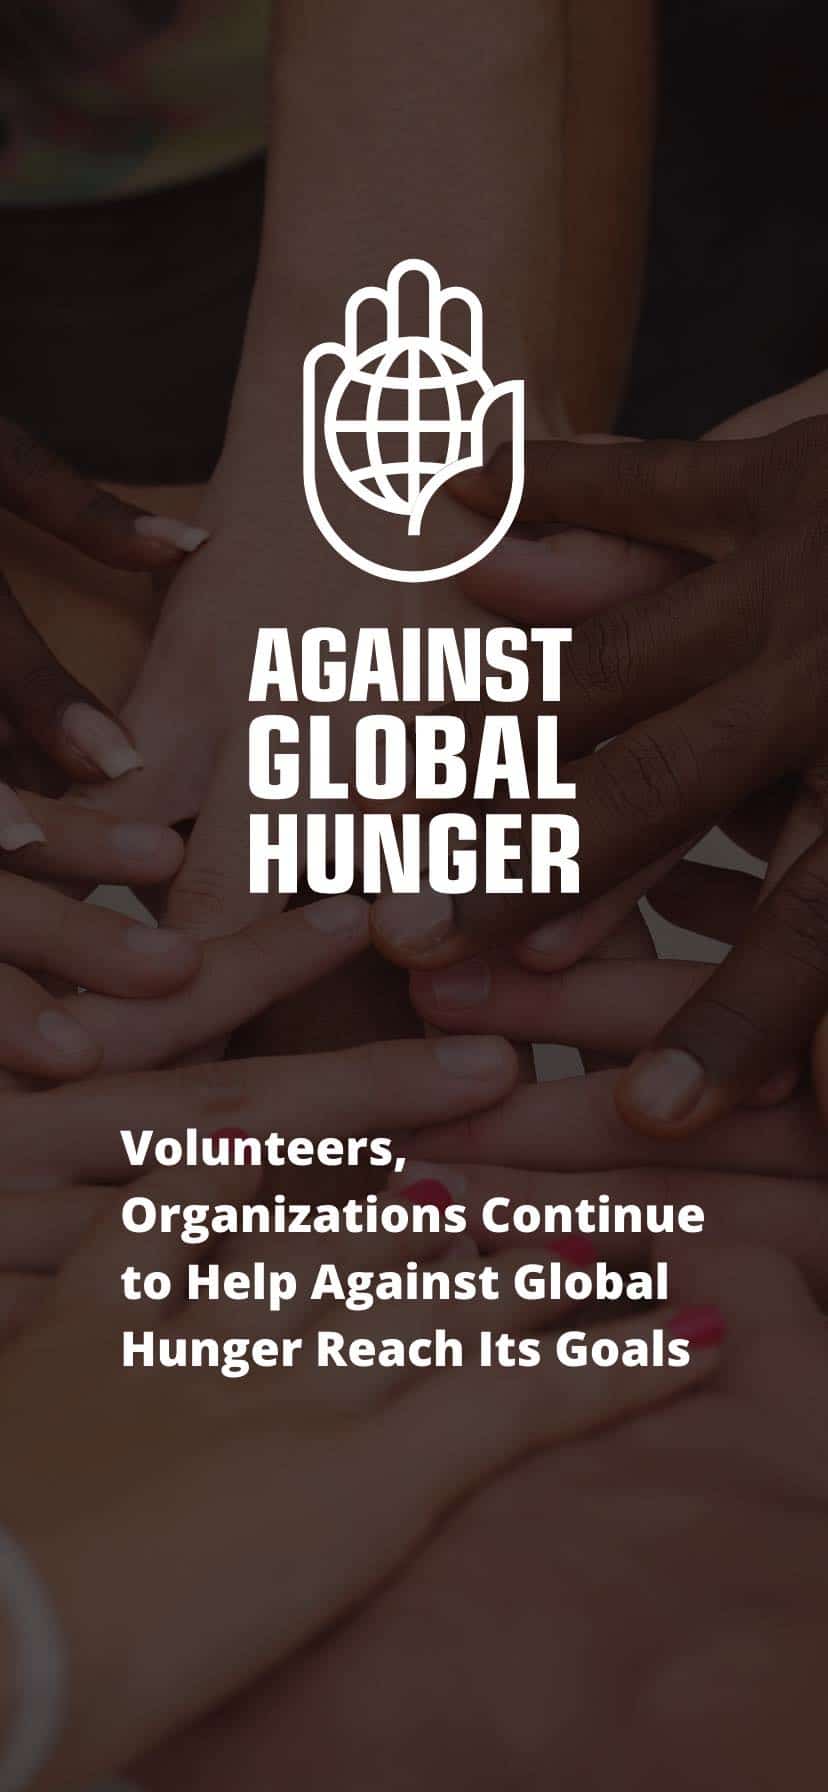 Volunteers, Organizations Continue to Help Against Global Hunger Reach Its Goals